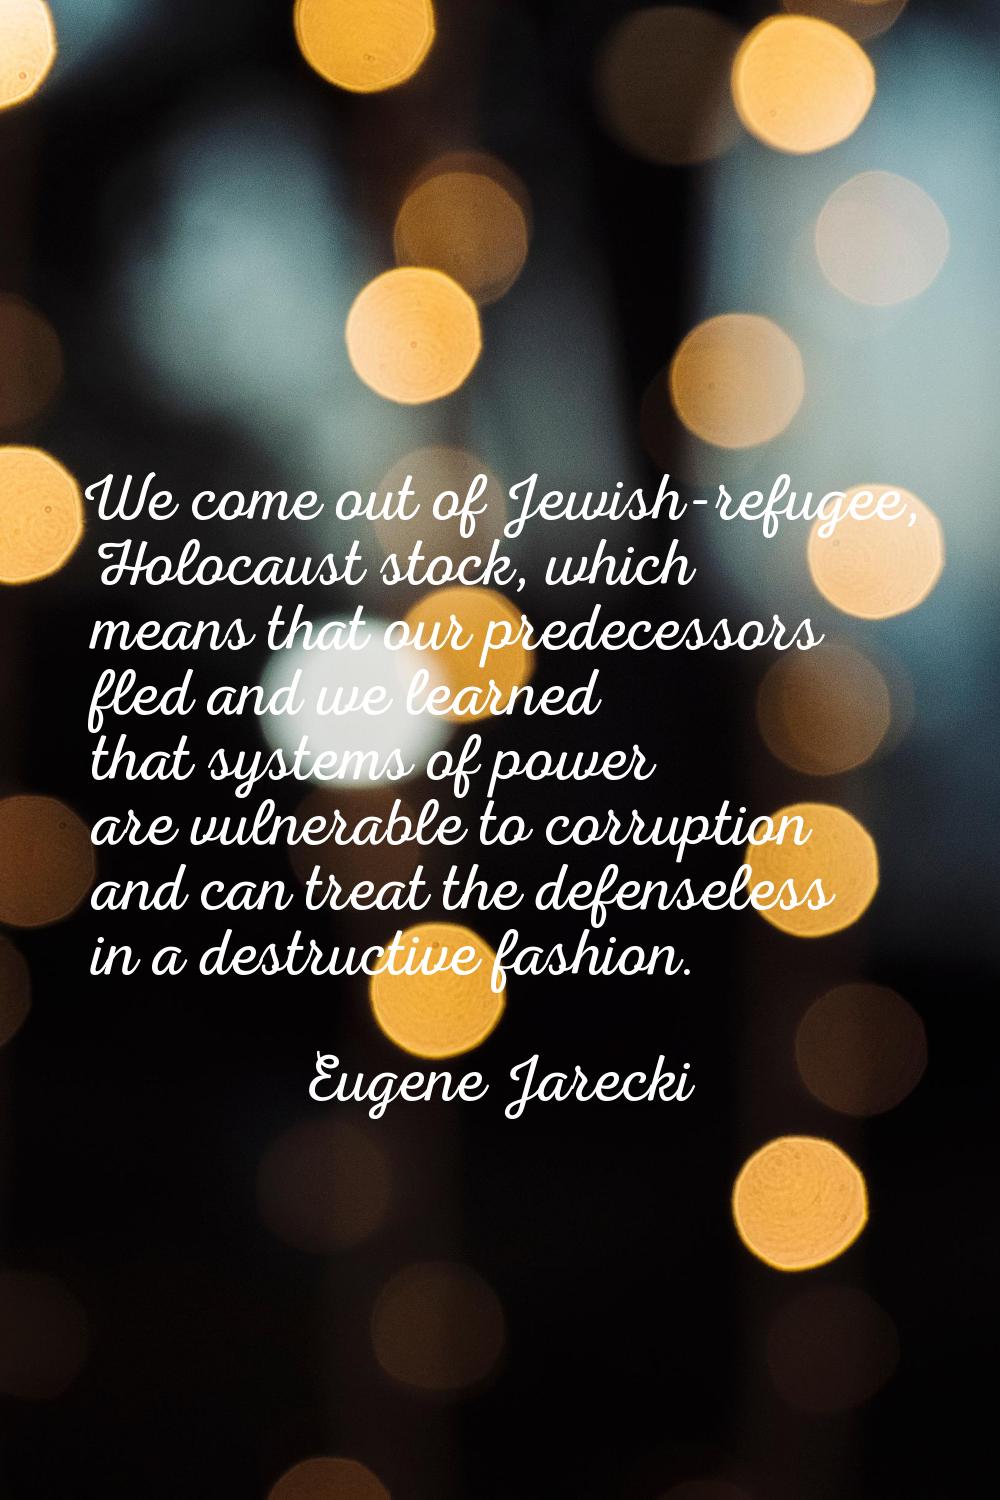 We come out of Jewish-refugee, Holocaust stock, which means that our predecessors fled and we learn